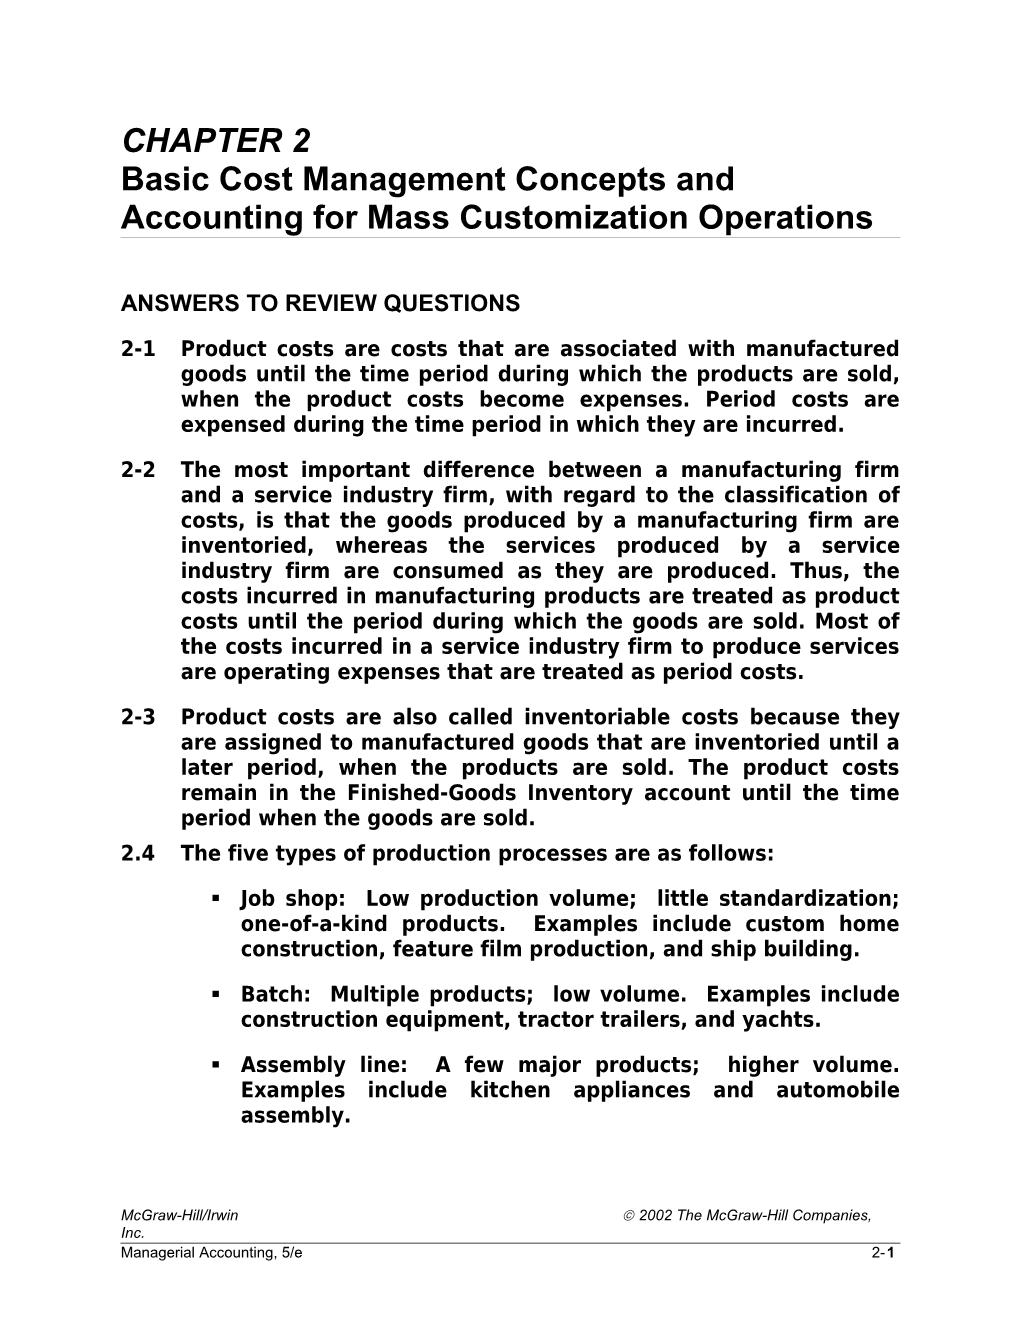 Basic Cost Management Concepts and Accounting for Mass Customization Operations